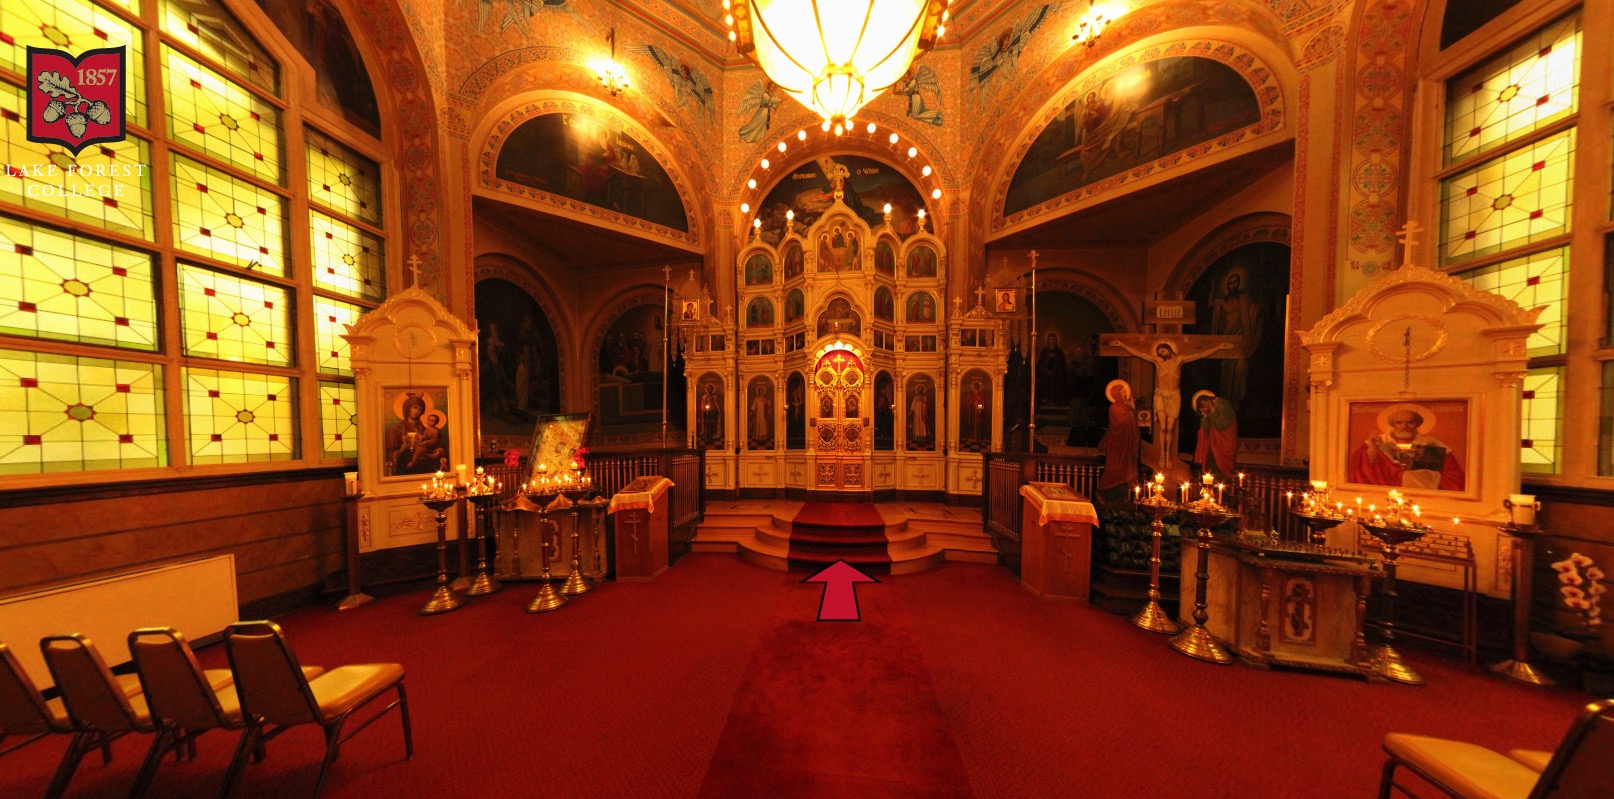 Holy Trinity Orthodox Cathedral in Chicago, a treasure of architecture and spirituality